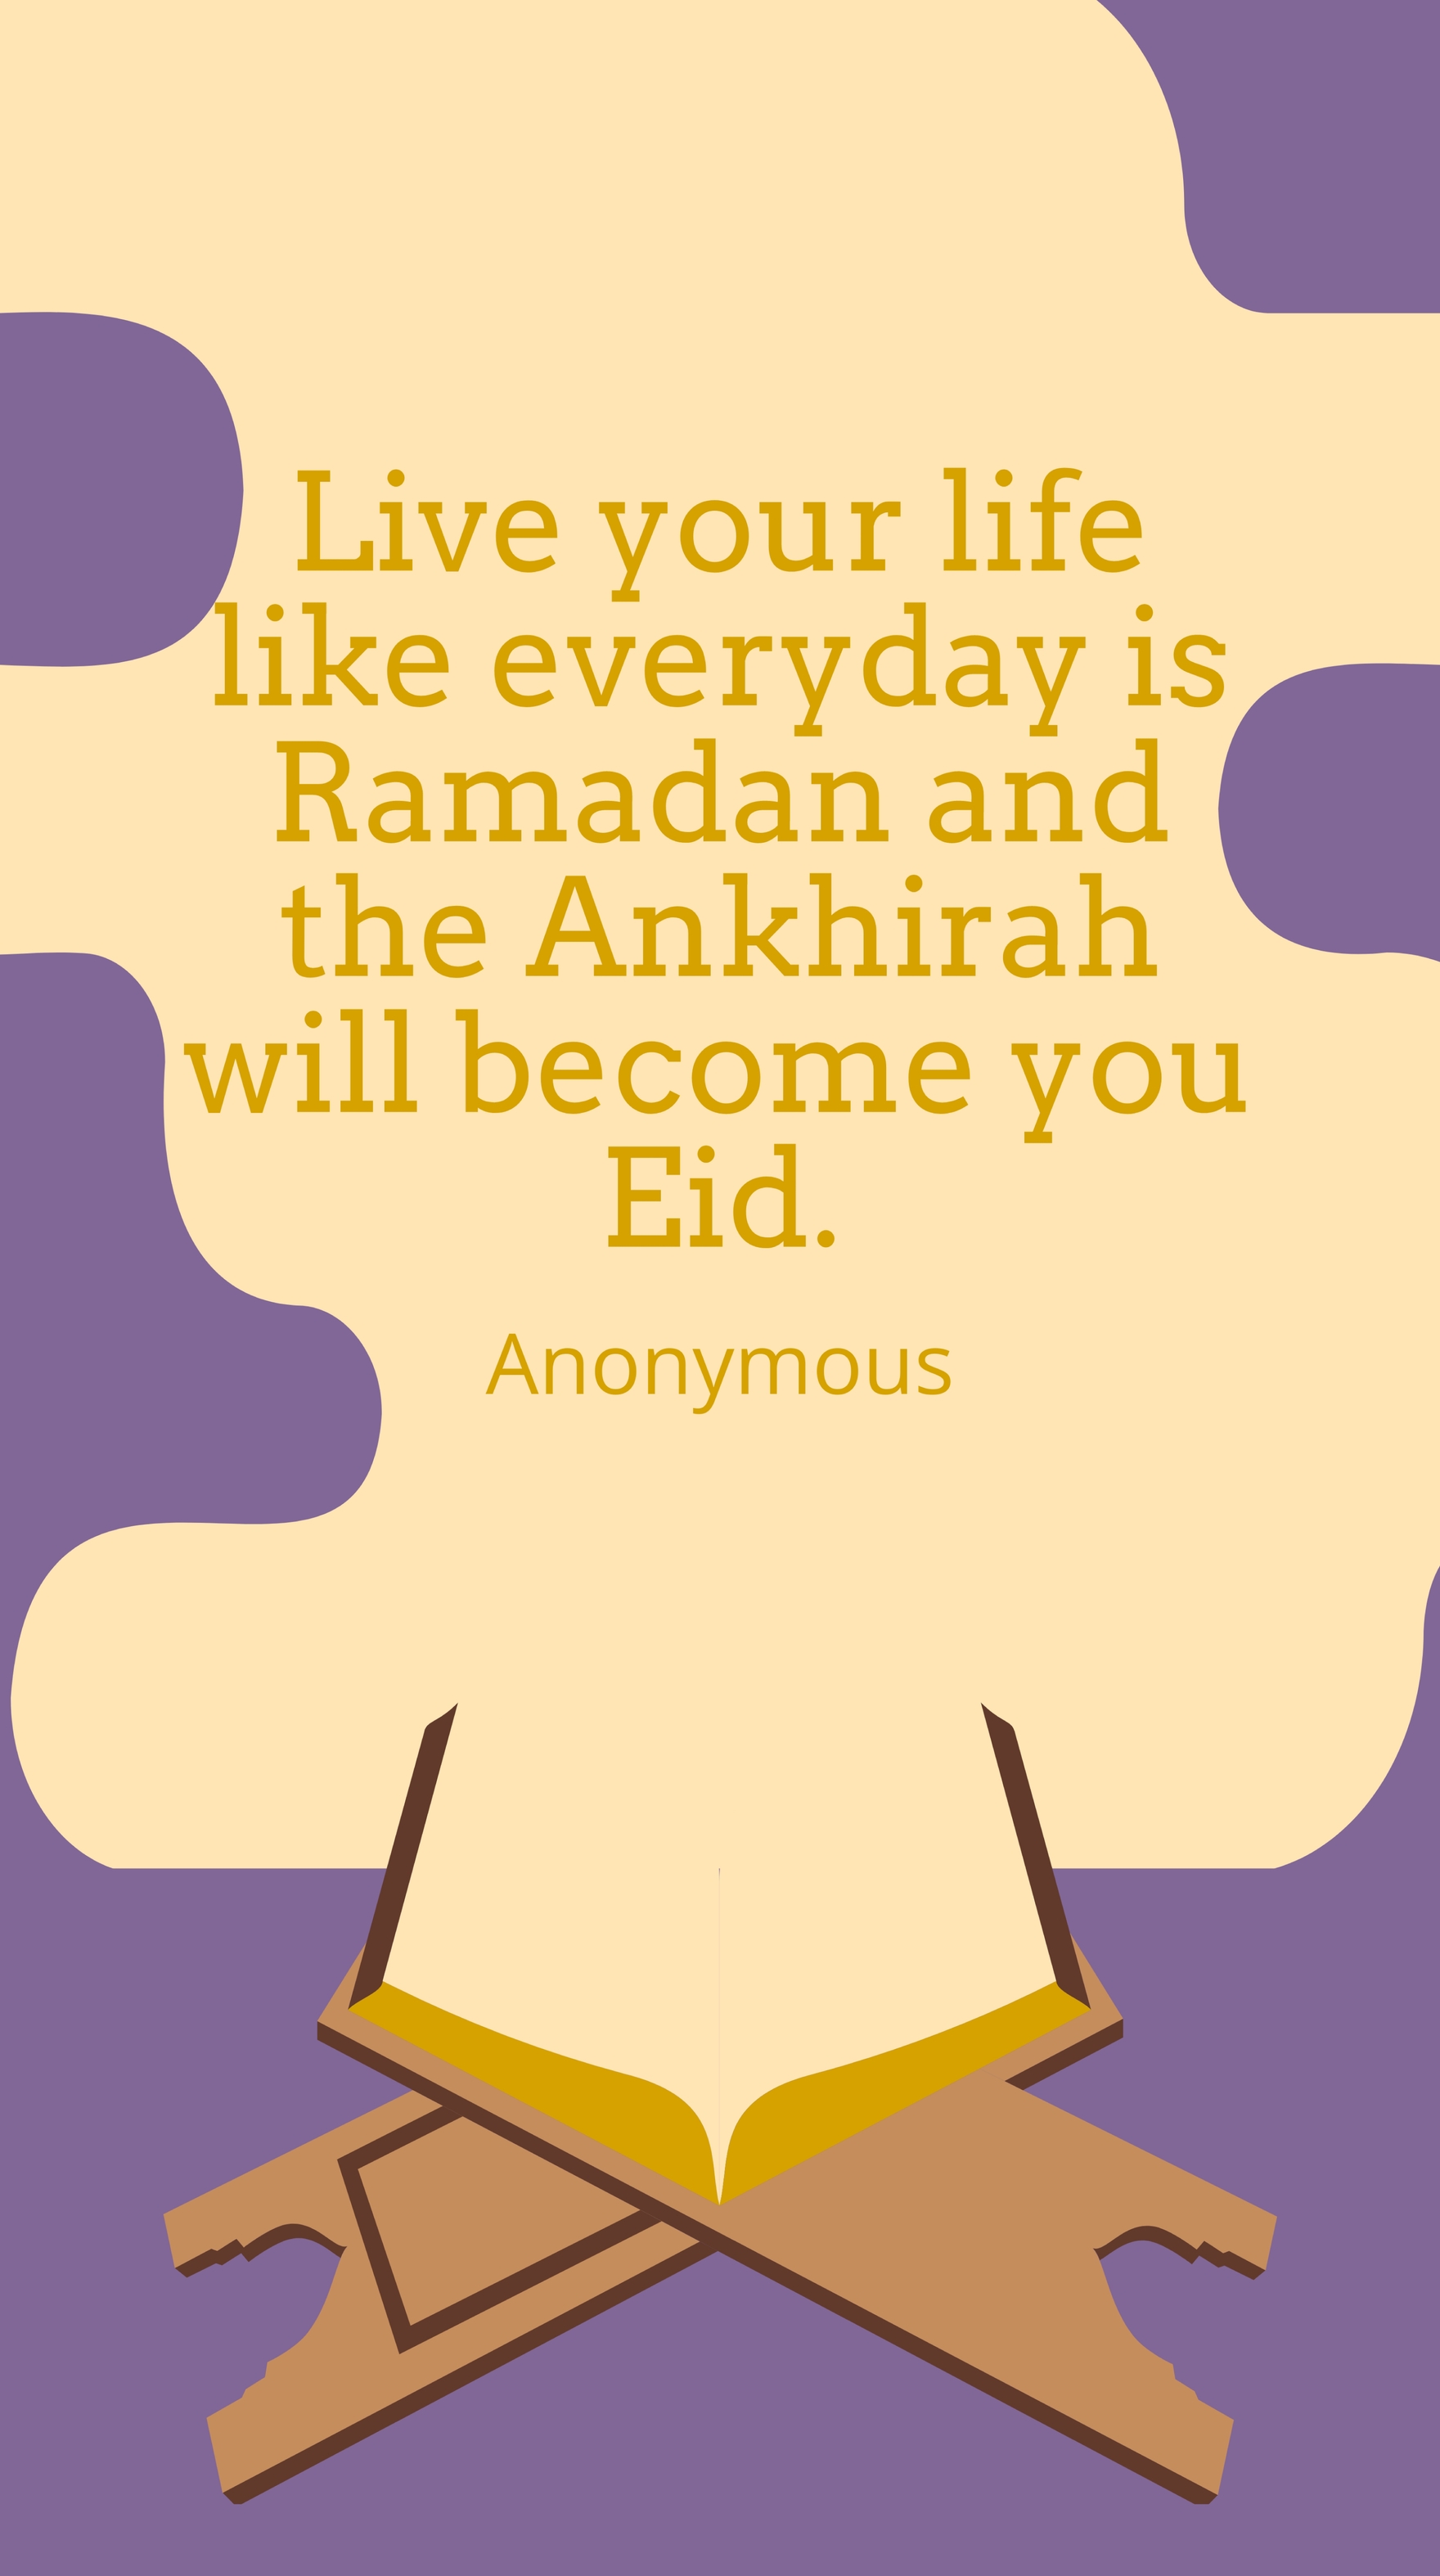 Free Anonymous - Live your life like everyday is Ramadan and the Ankhirah will become you Eid.